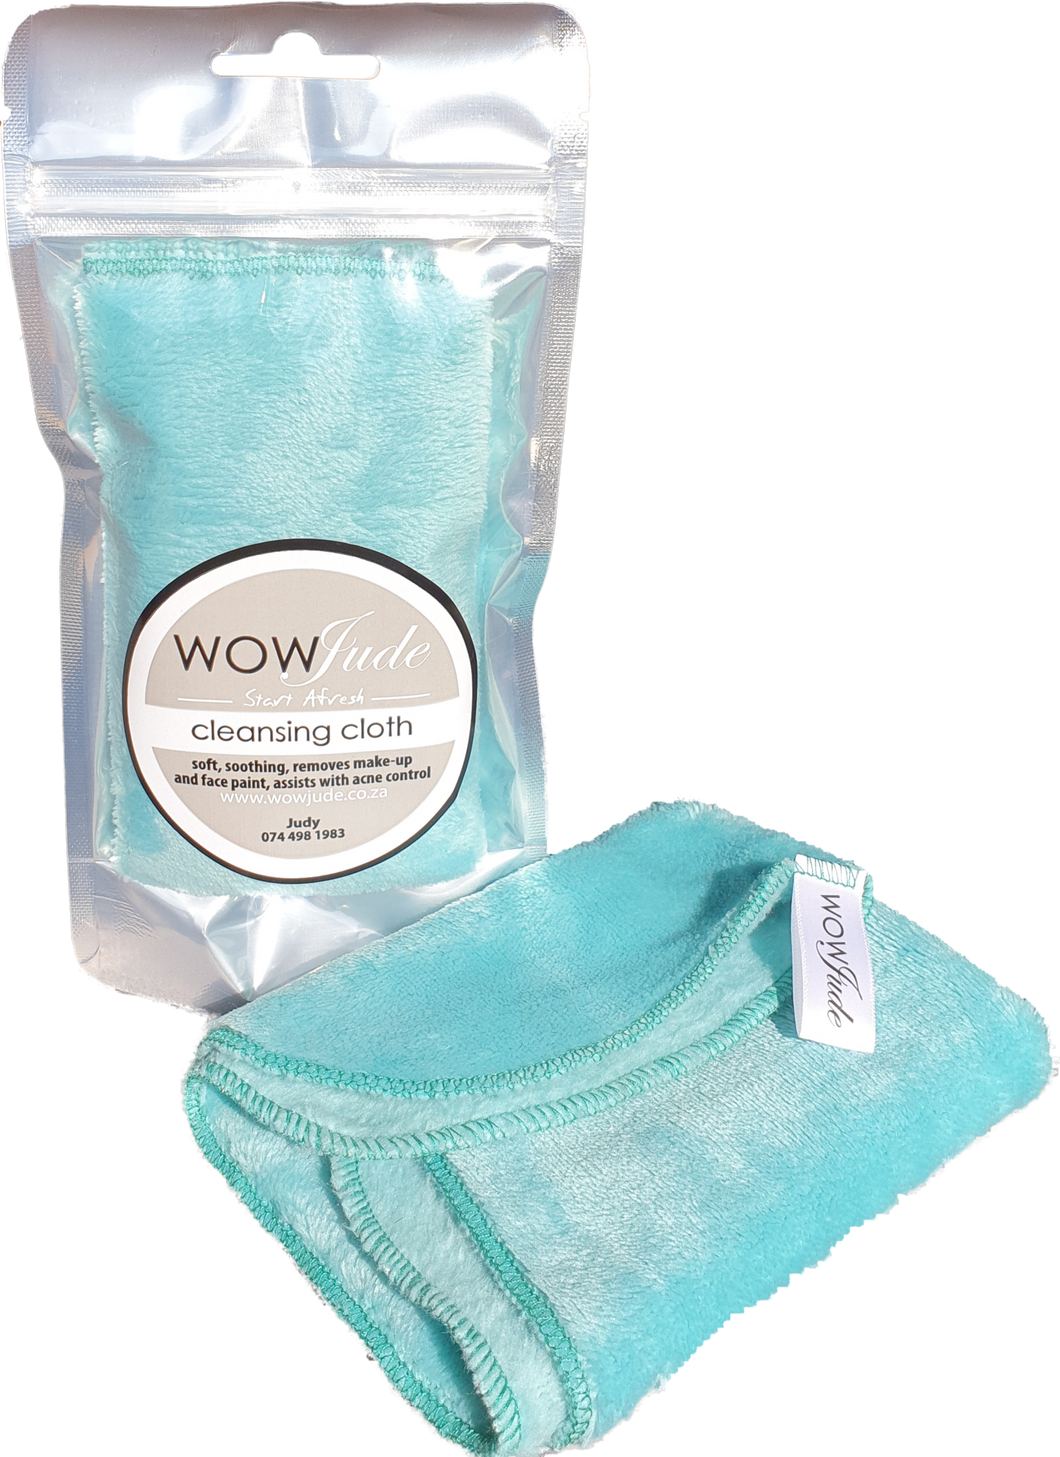 Wow Jude - Cleansing cloths